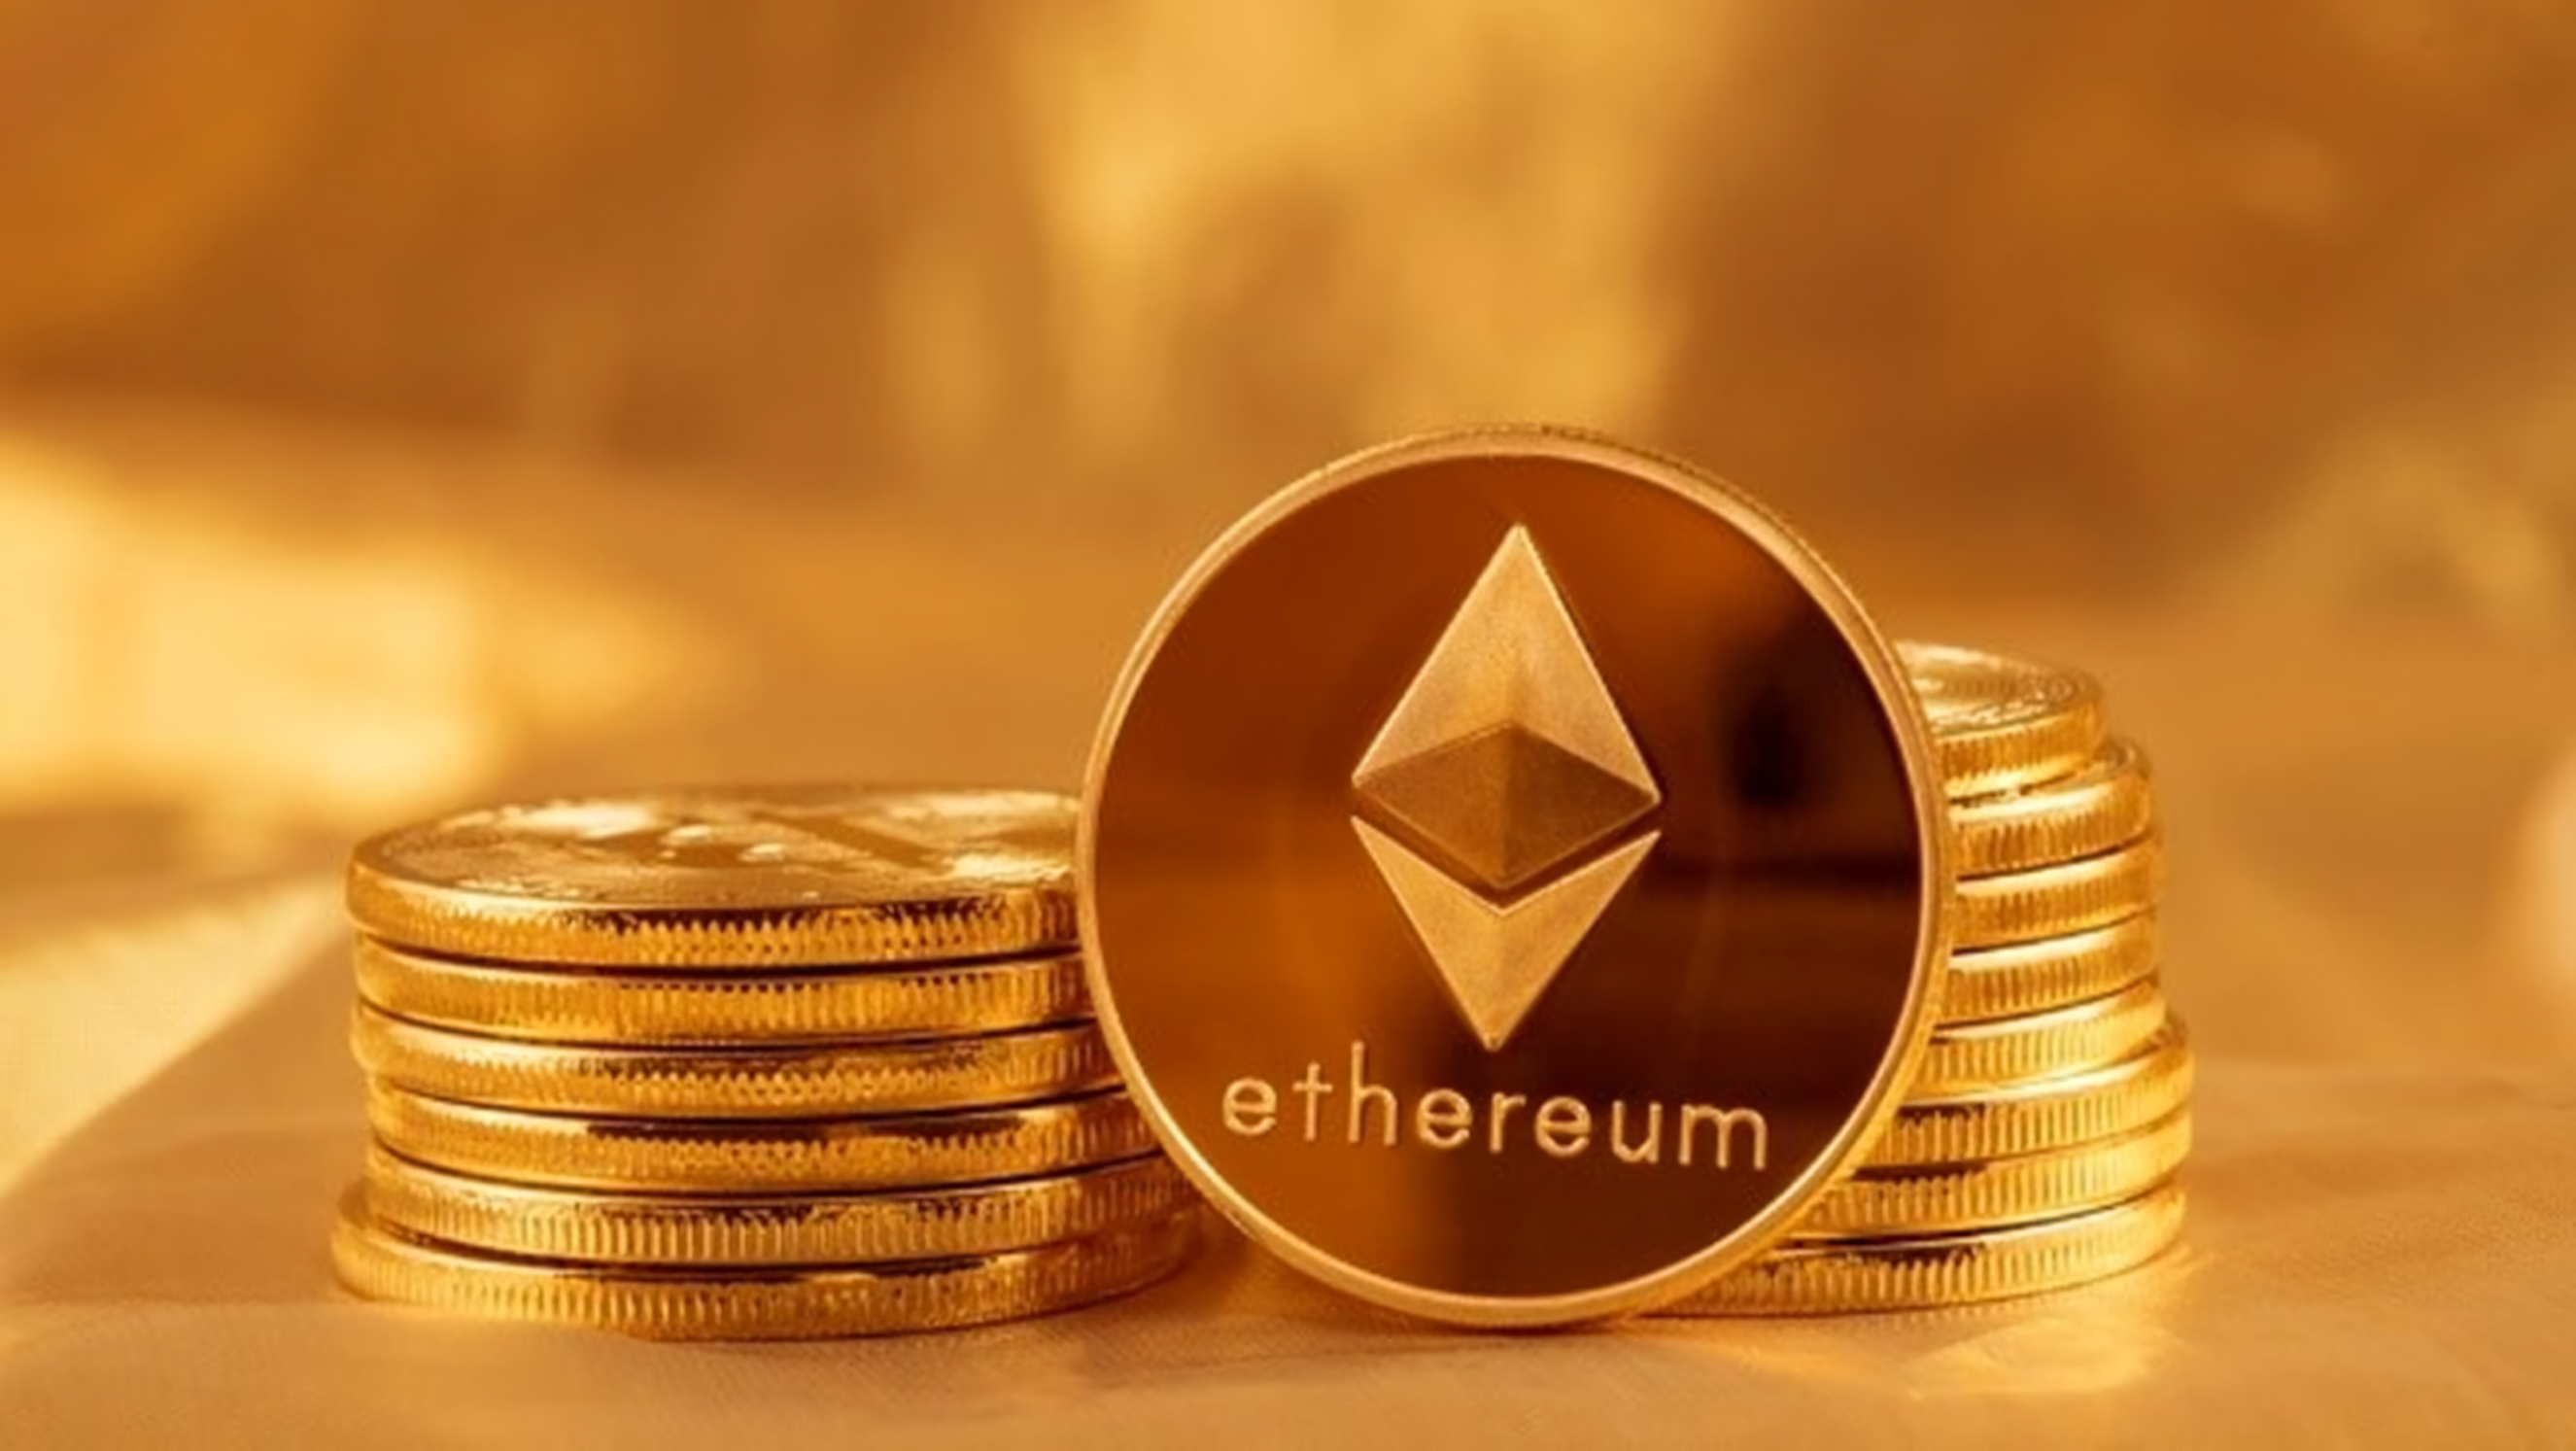 Ethereum-branded gold coins are stacked in two piles, with one coin facing forward displaying the Ethereum logo.